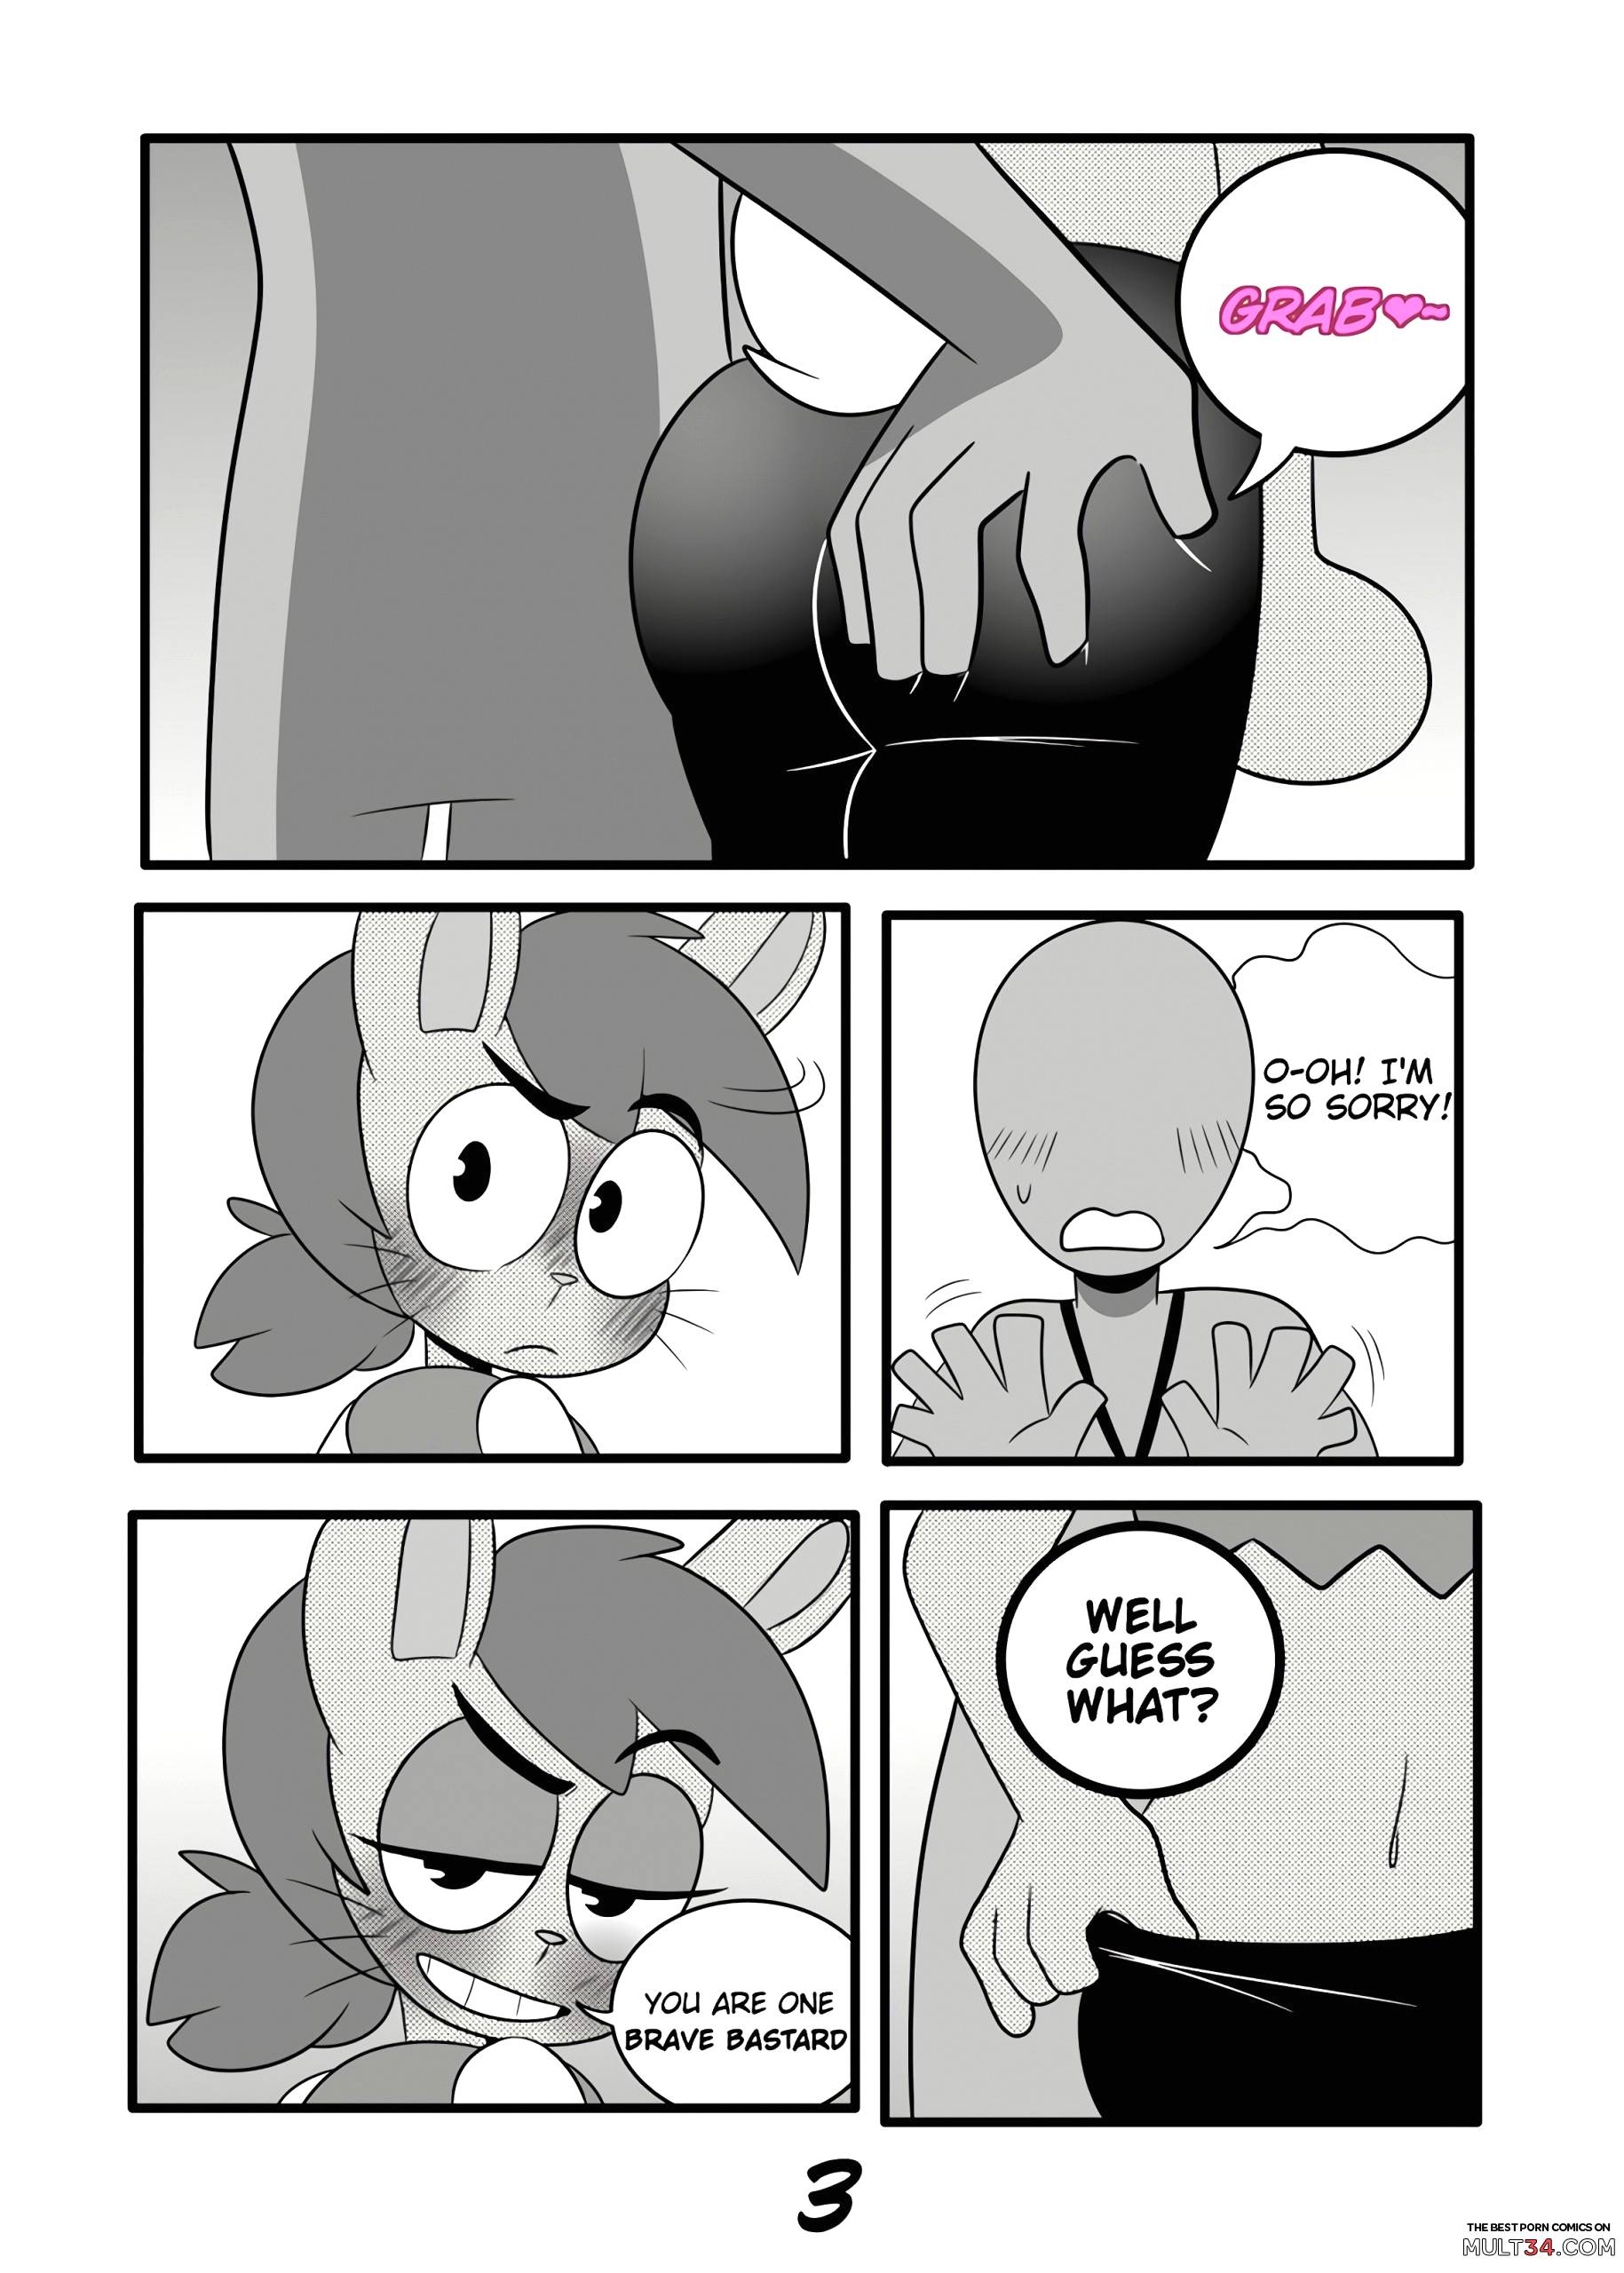 Down Her Rabbit Hole page 4